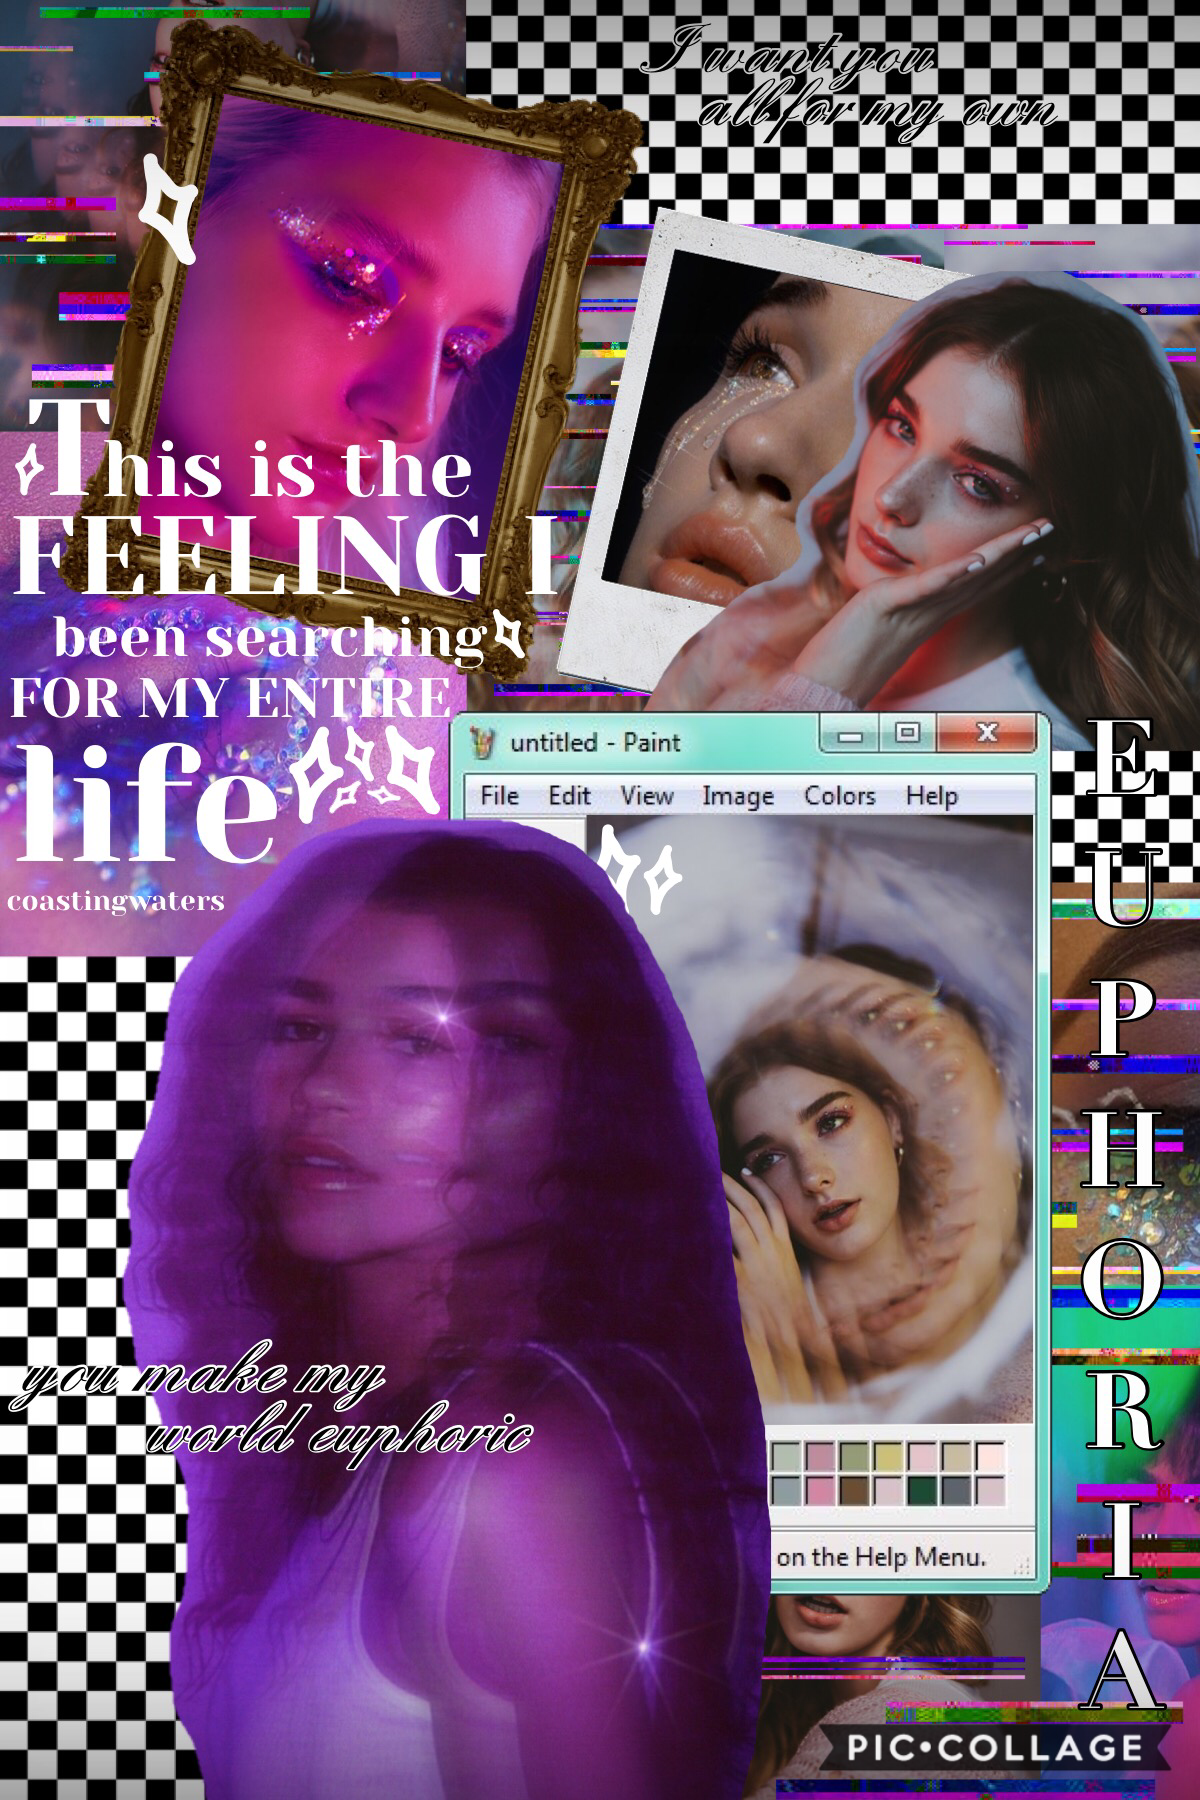 📓21/1/21📓
Here’s another Euphoria collage, but it’s a little brighter! I love making these, it’s so fun! Please refrain from sending me those messages with all the stuff like, “you have to send this to 15 friends and this will come true” I’ve gotten them 